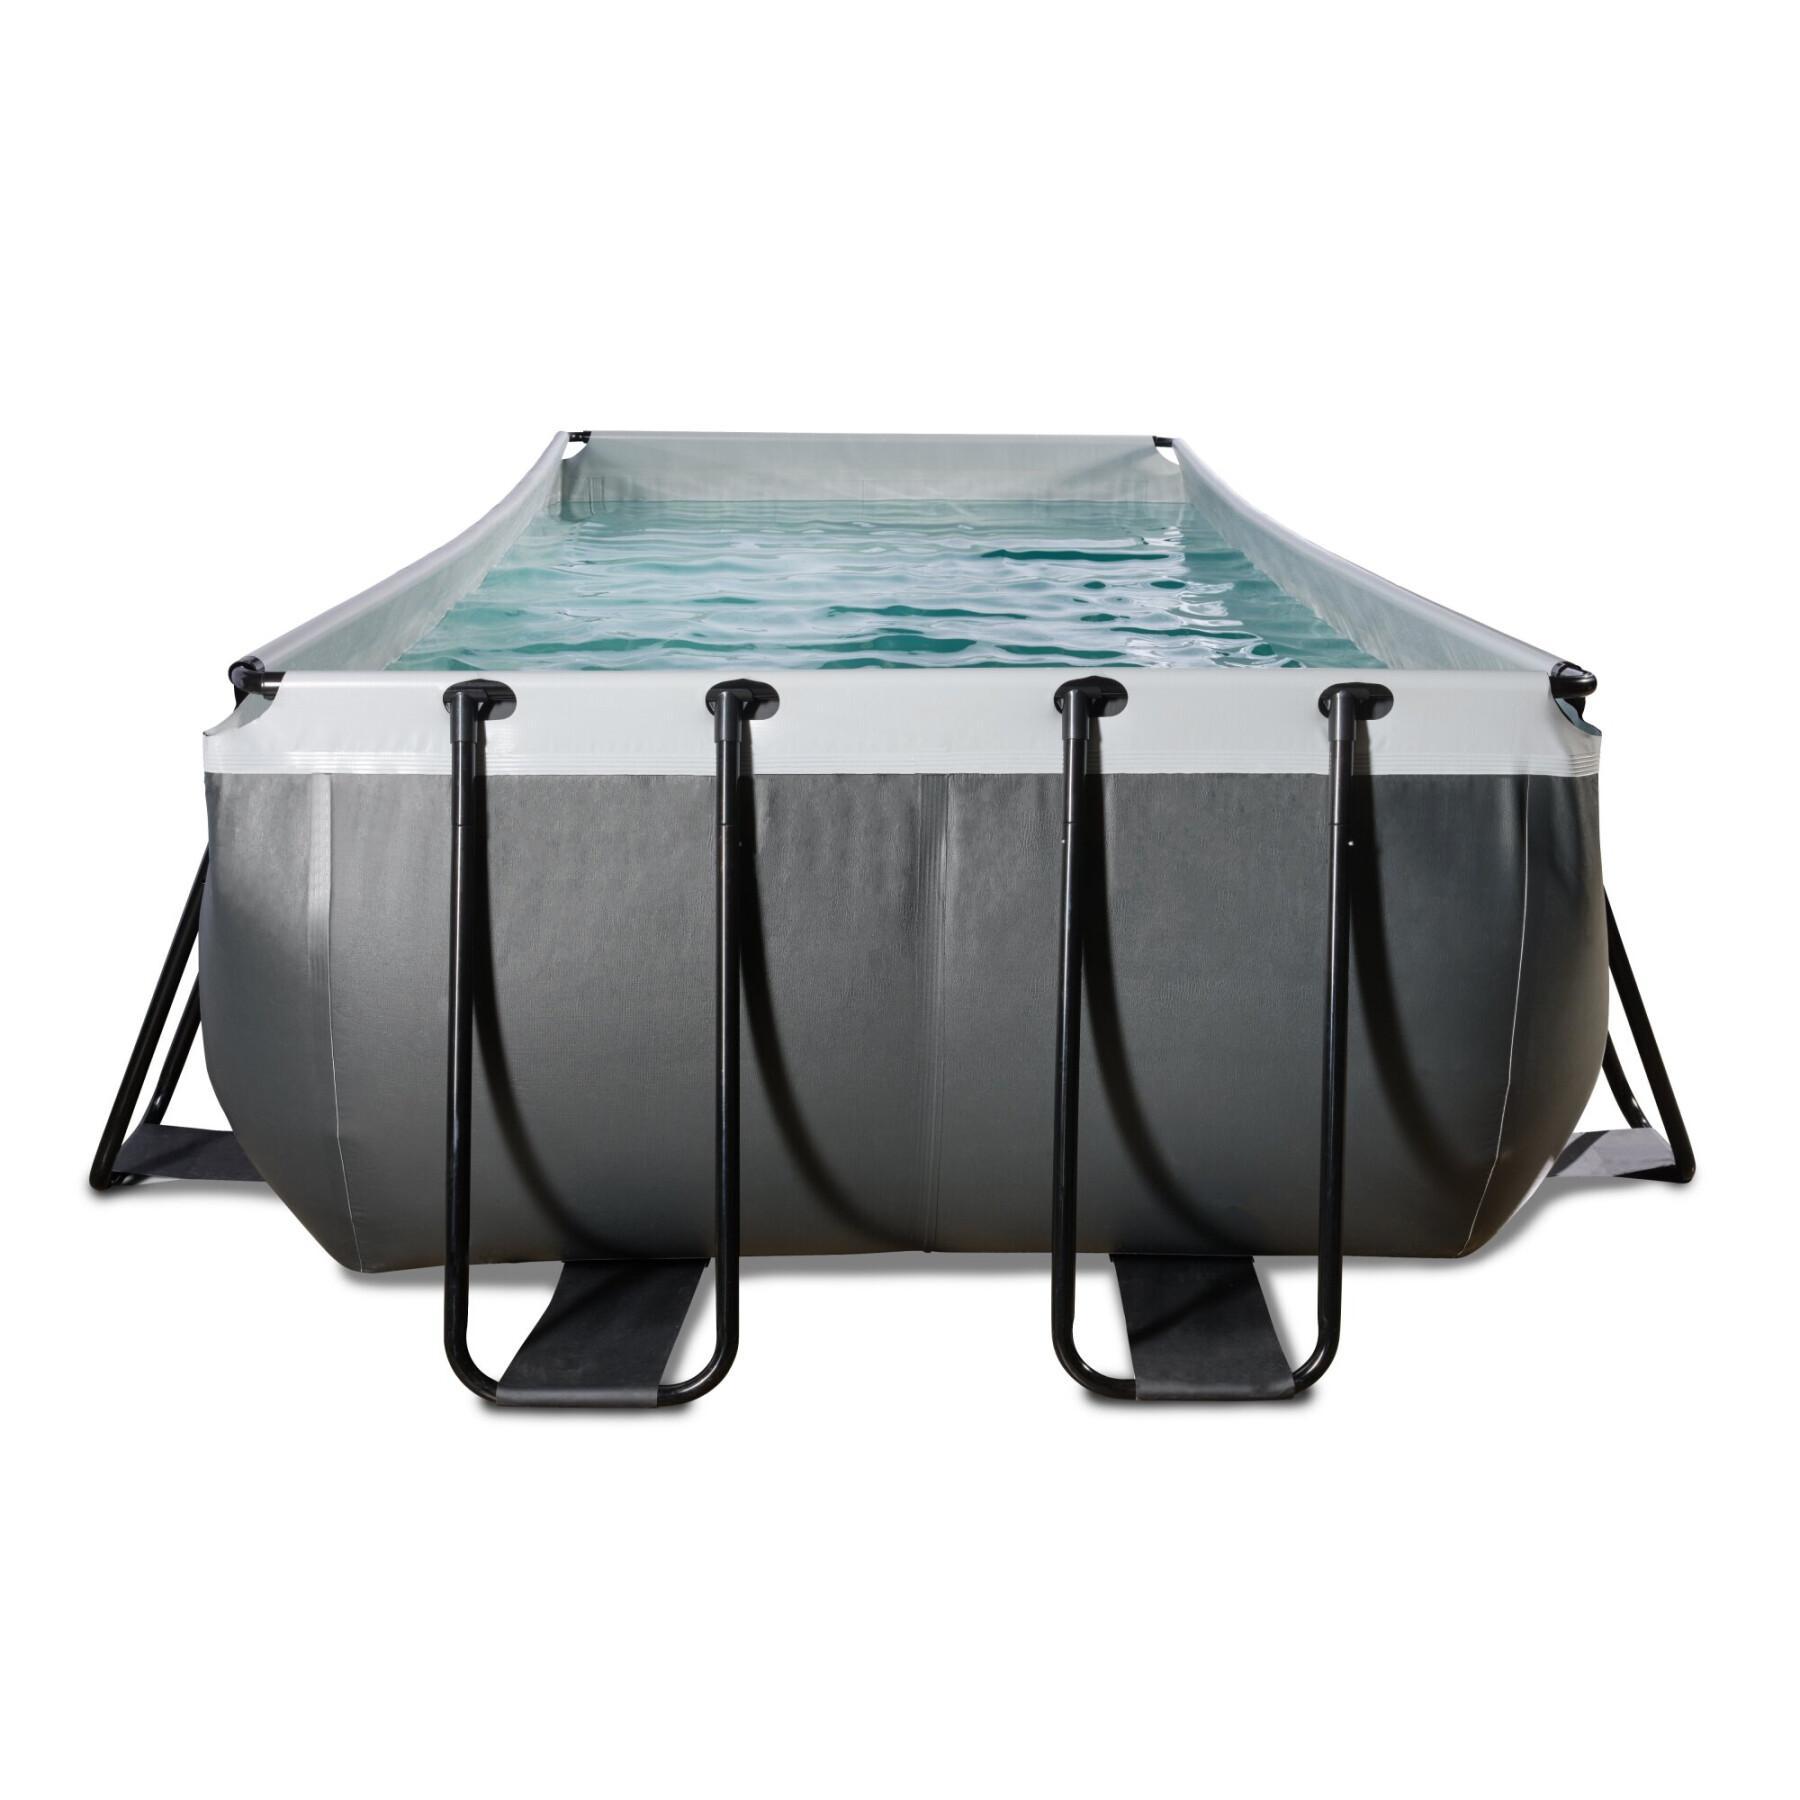 Swimming pool with filter pump in leather for children Exit Toys 400 x 200 x 122 cm